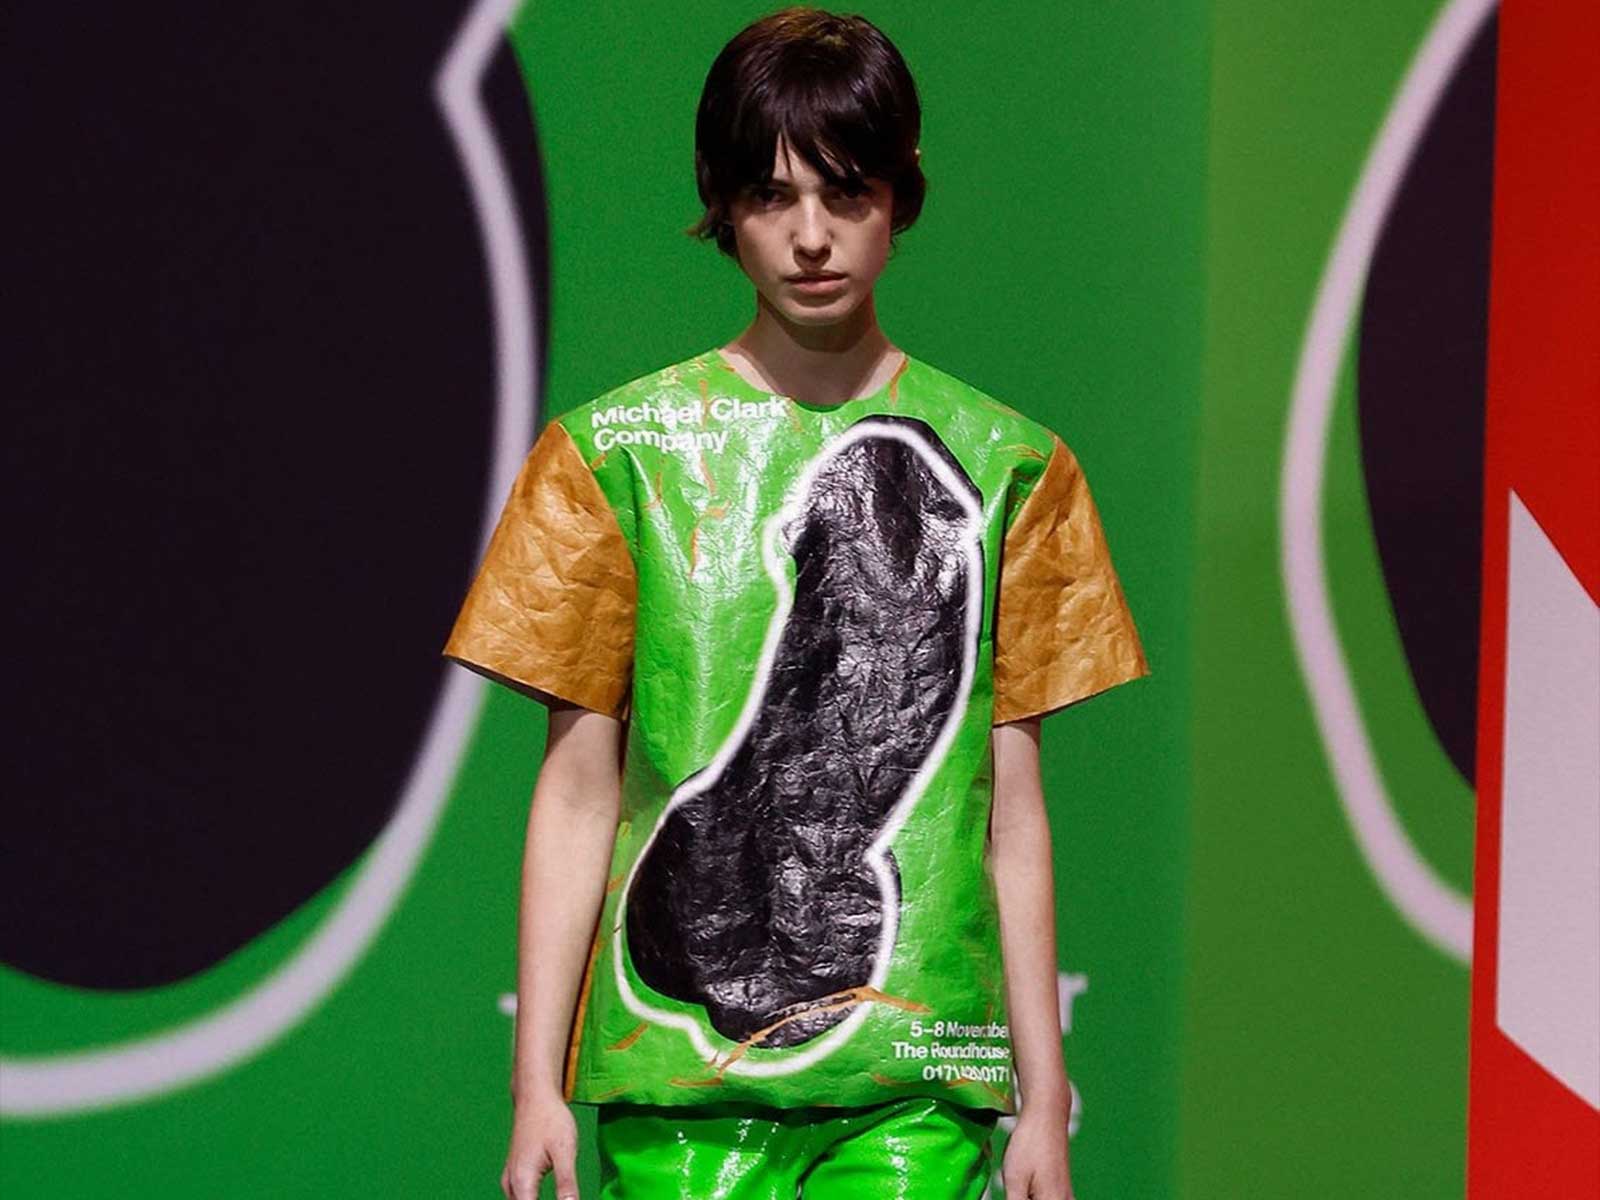 JW Anderson surprises again with an eclectic fashion show